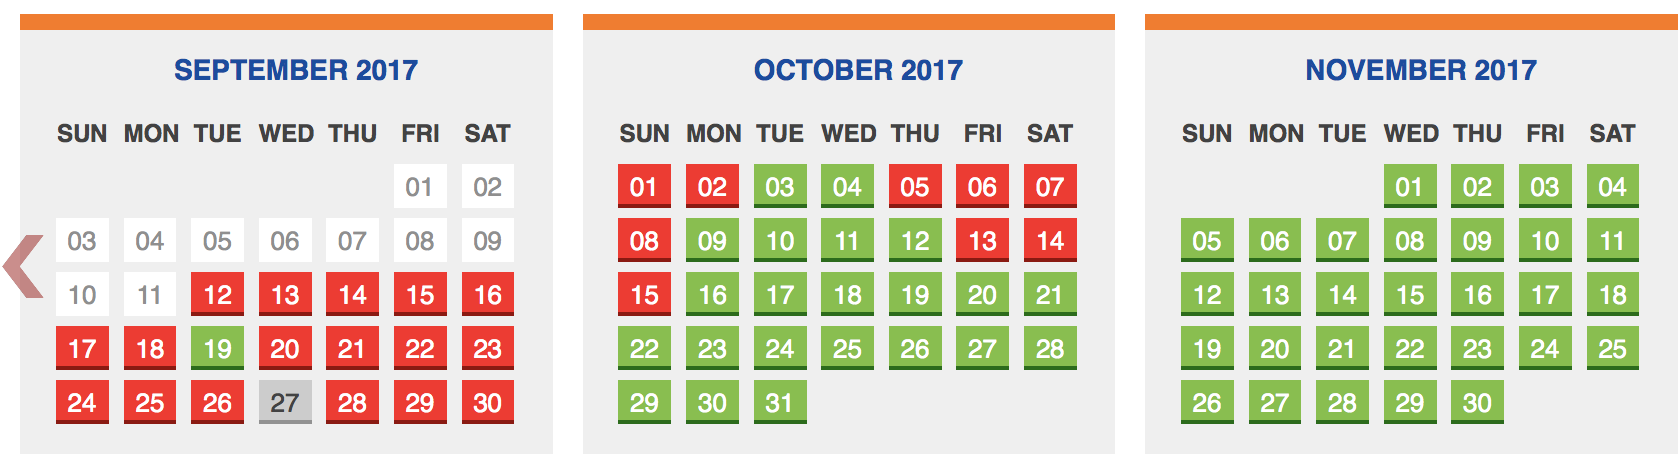 Special Entry darshan ticket availability chart for september october